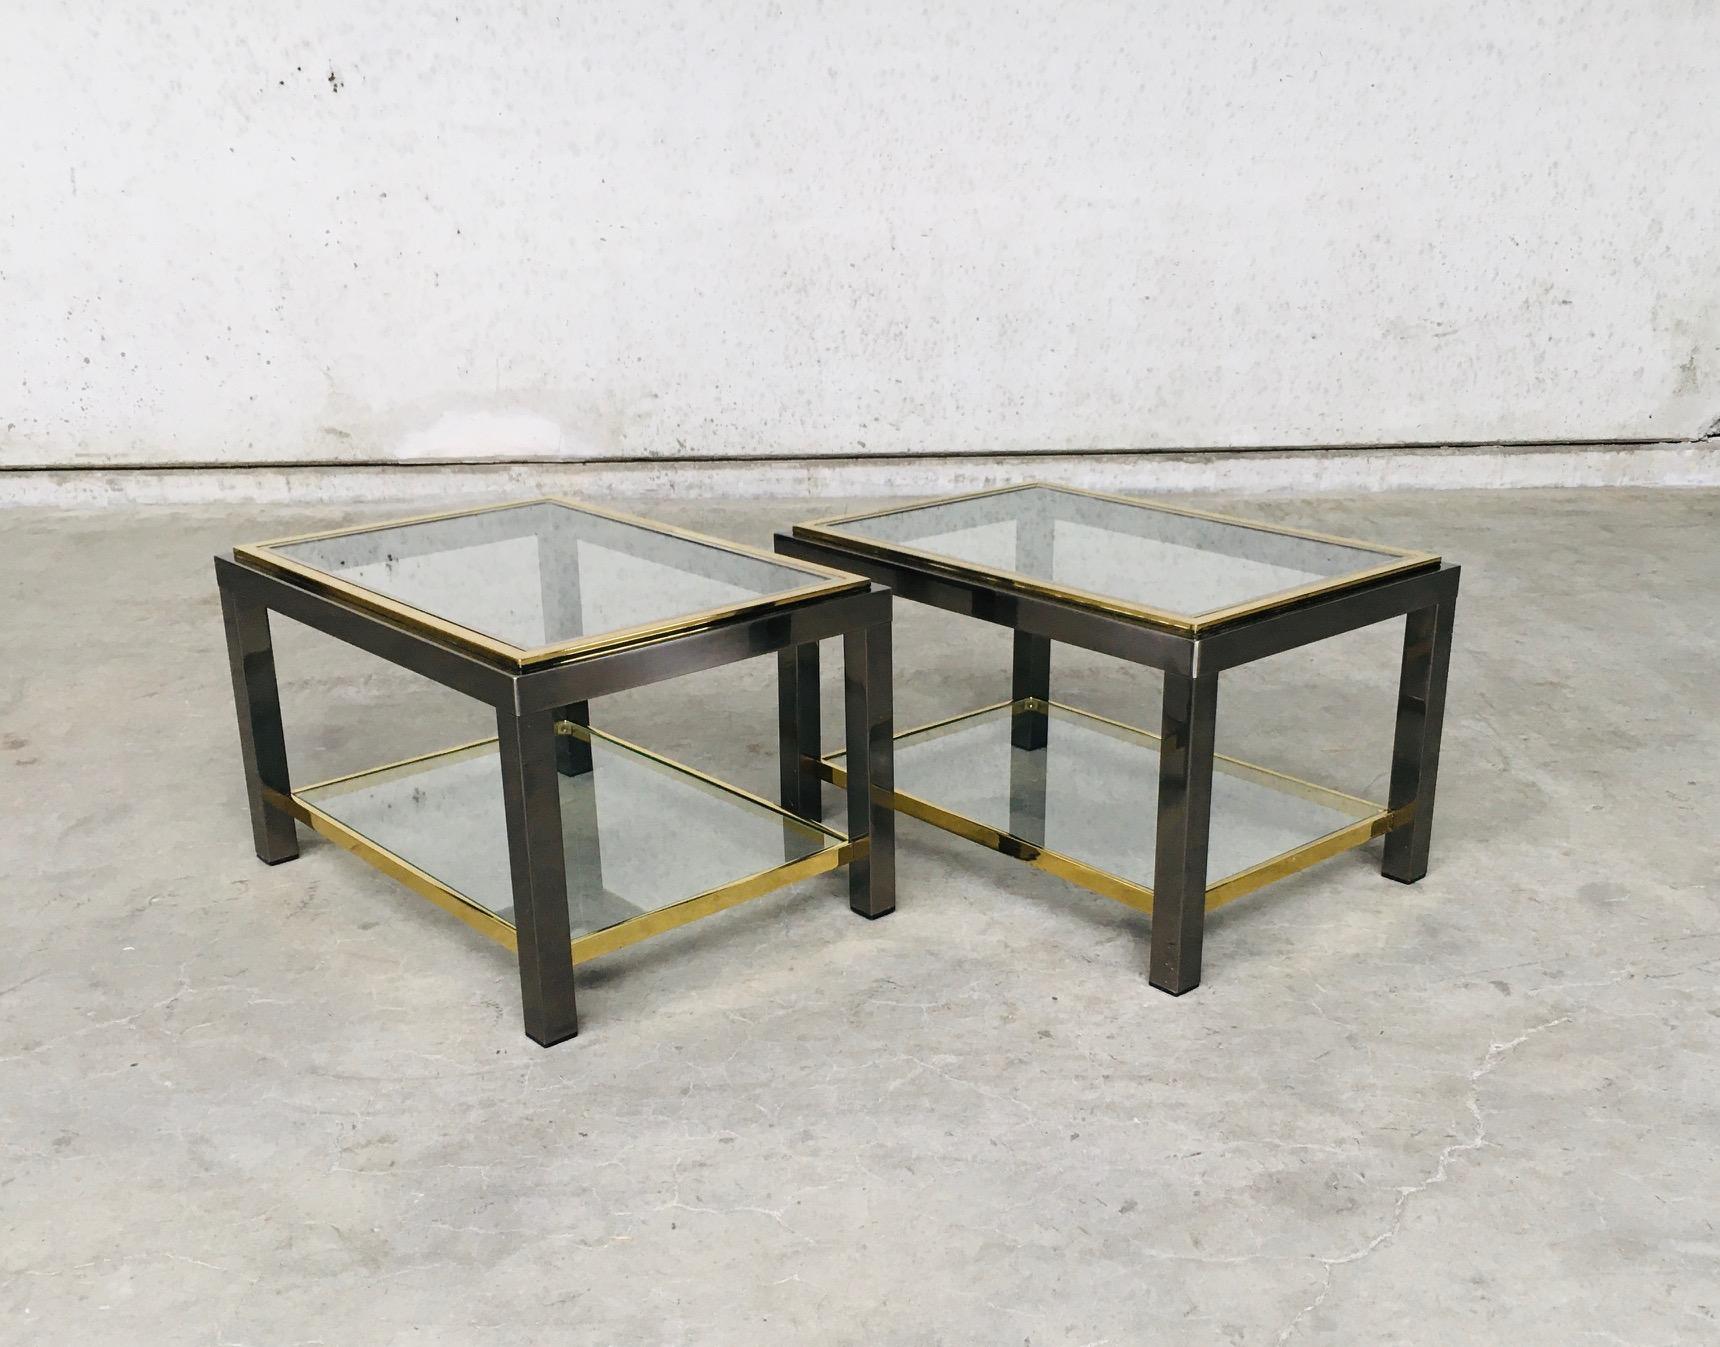 Postmodern Italian design in the style of Willy Rizzo sofa ends two tier side table set of 2. Made in Italy, 1970's. Brushed metal & brass & chrome construction with clear glass tops. Two tiers both in clear glass. All original set. Both are in very